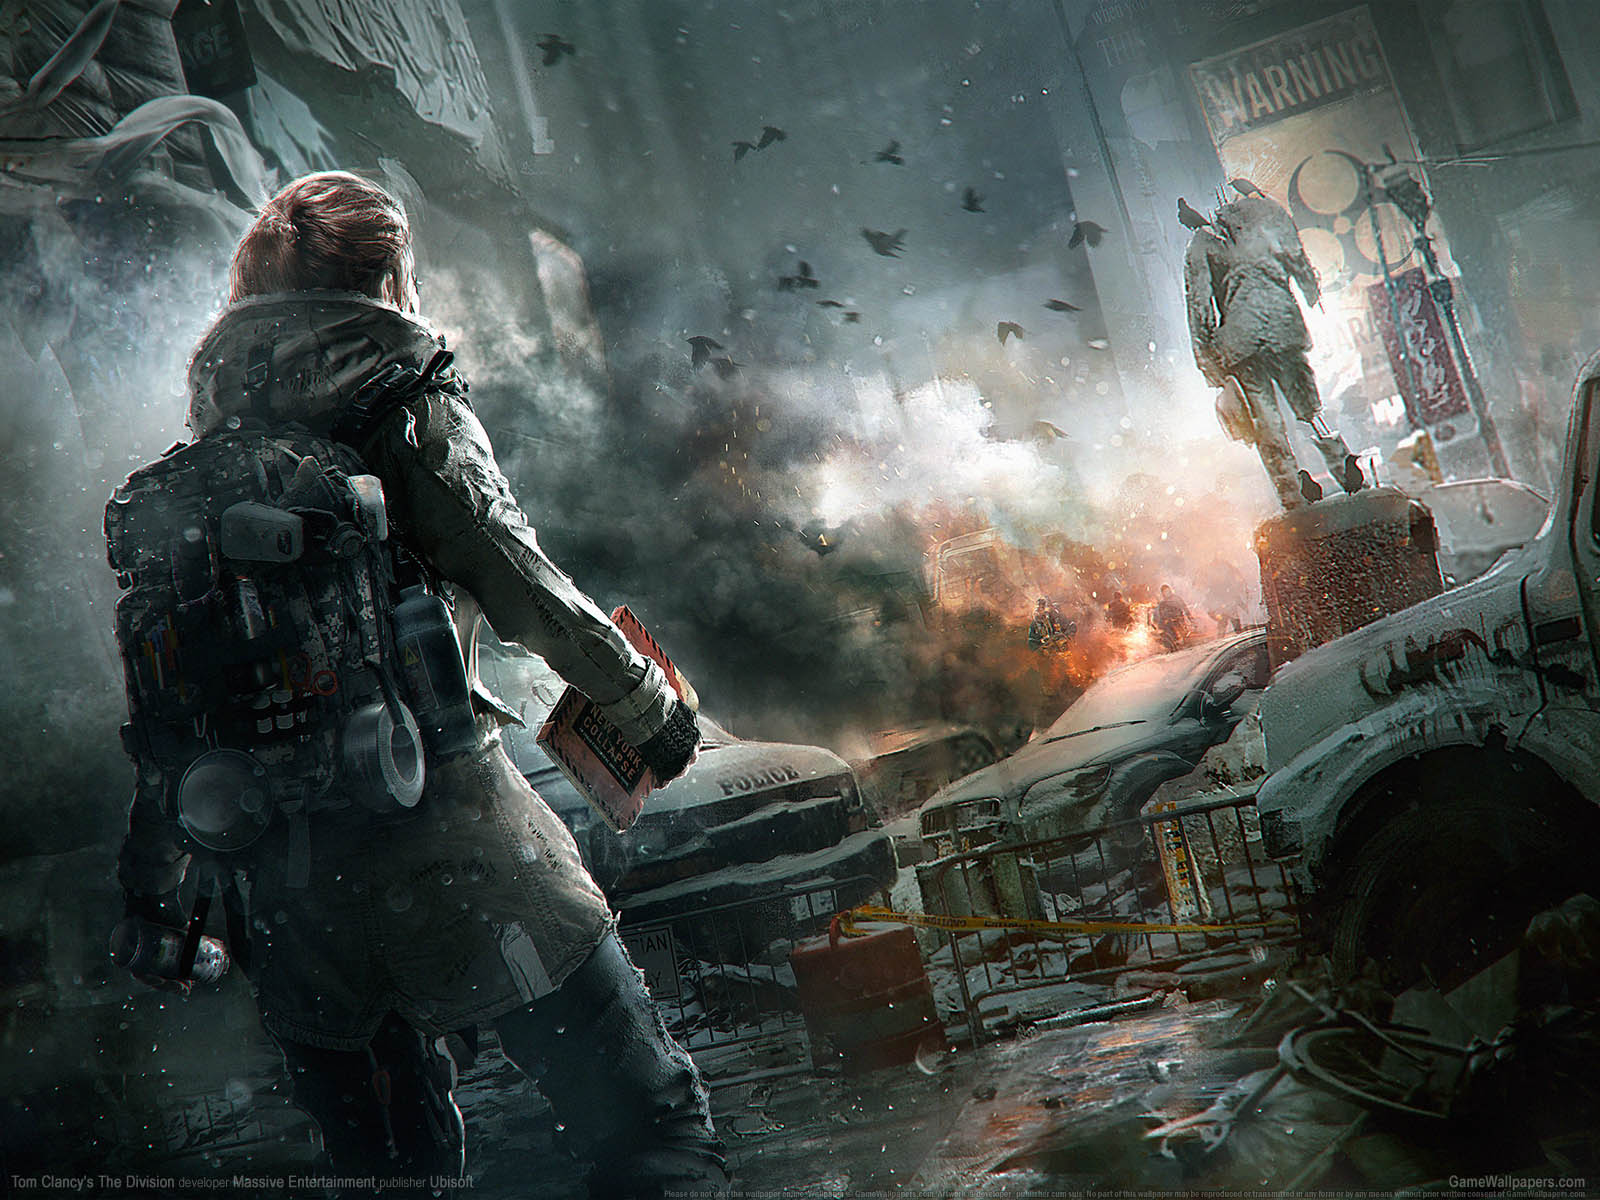 Tom Clancy%5C%27s The Division achtergrond 08 1600x1200